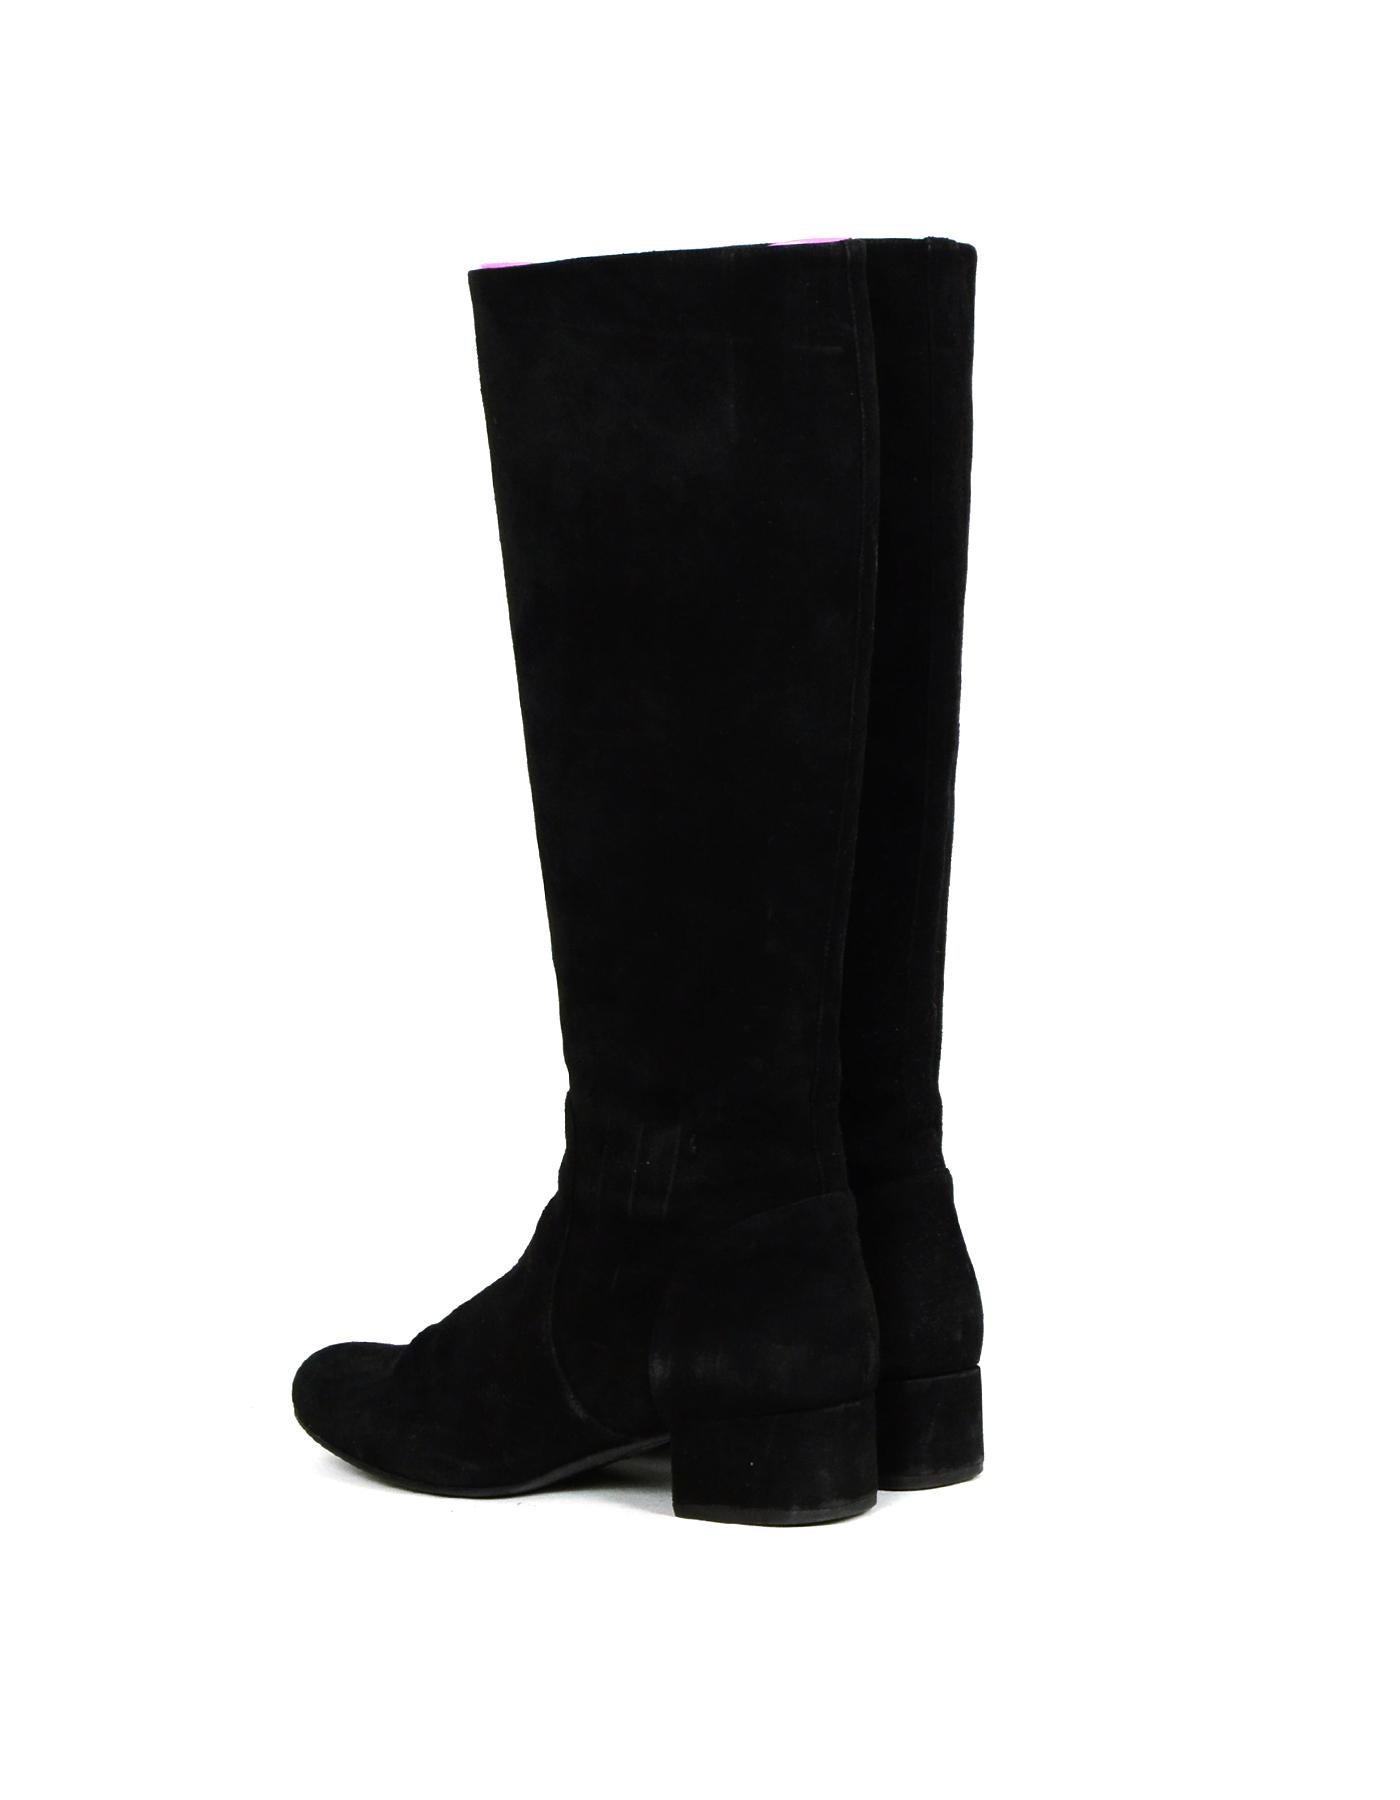 Saint Laurent Black Suede Boot w/ Side Zip sz 37.5 In Excellent Condition In New York, NY